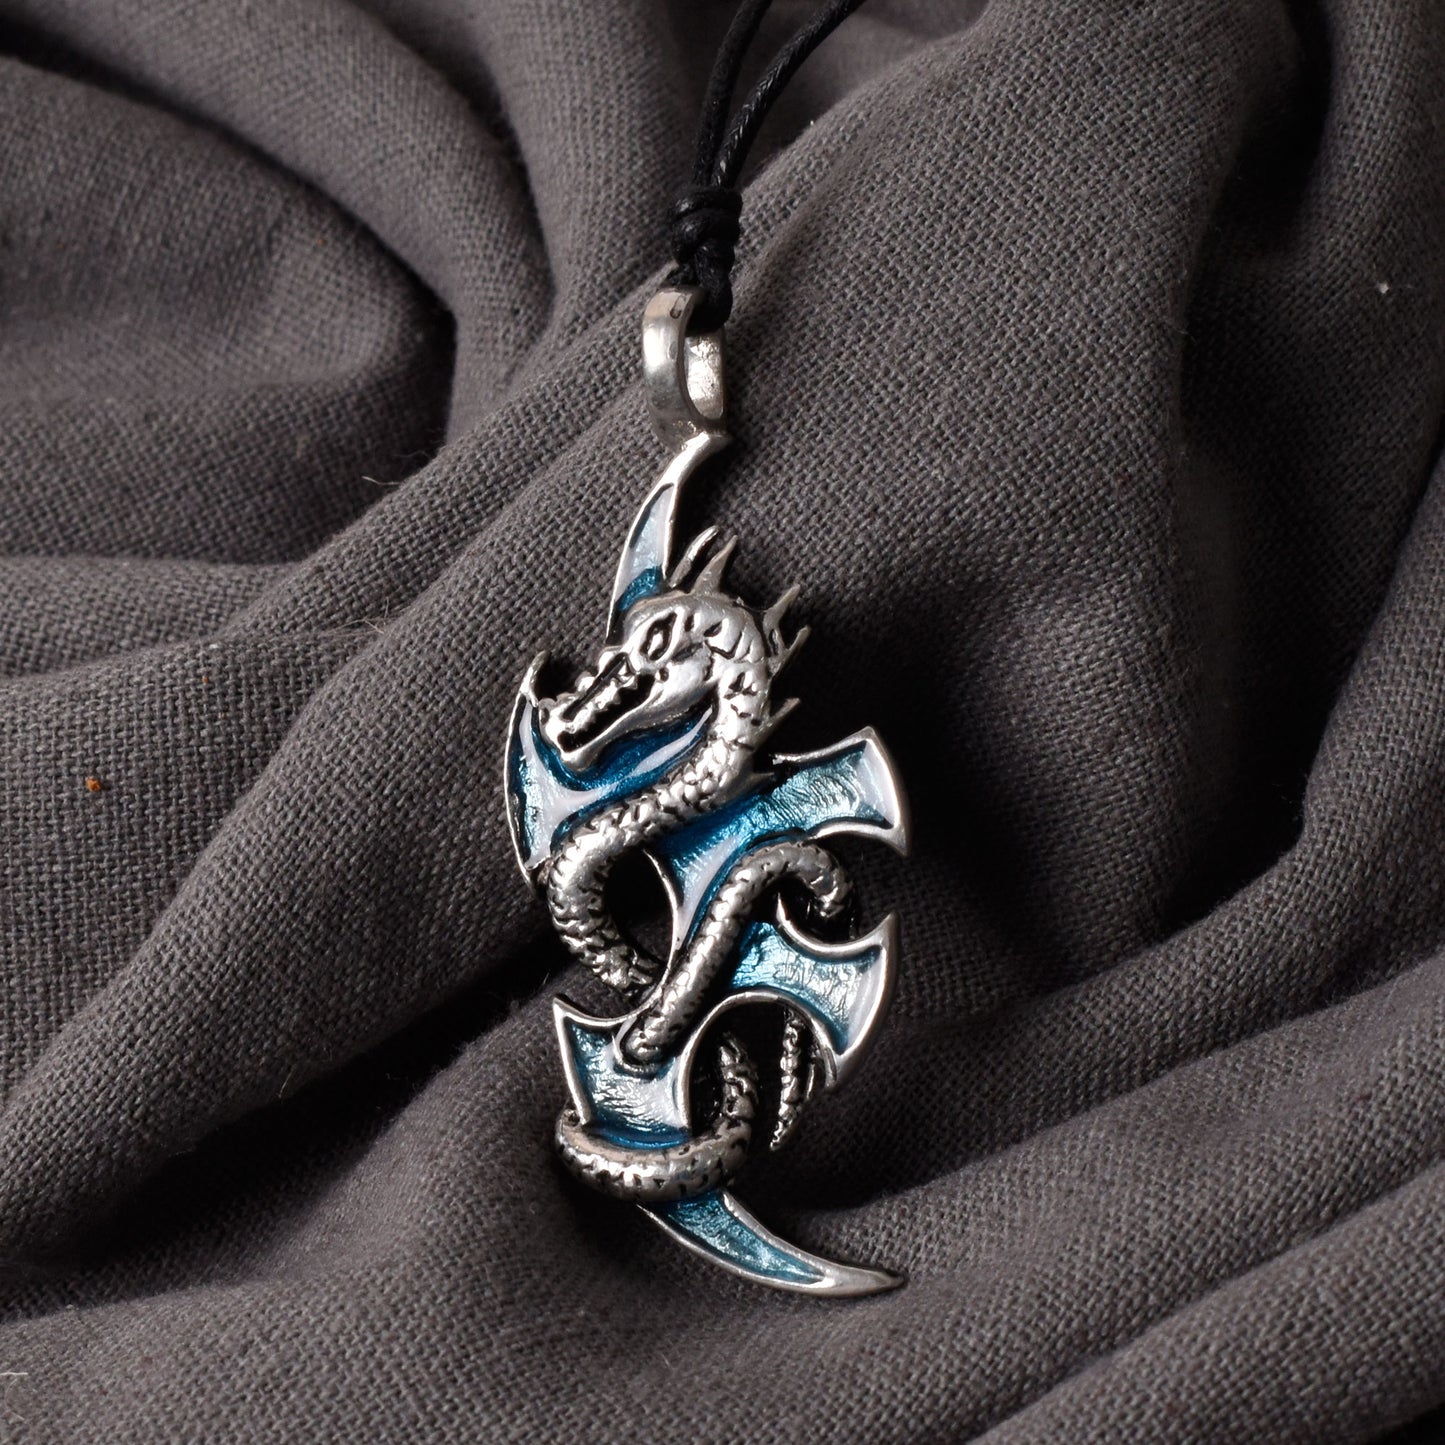 Colorful Dragon Silver Pewter Charm Necklace Pendant Jewelry